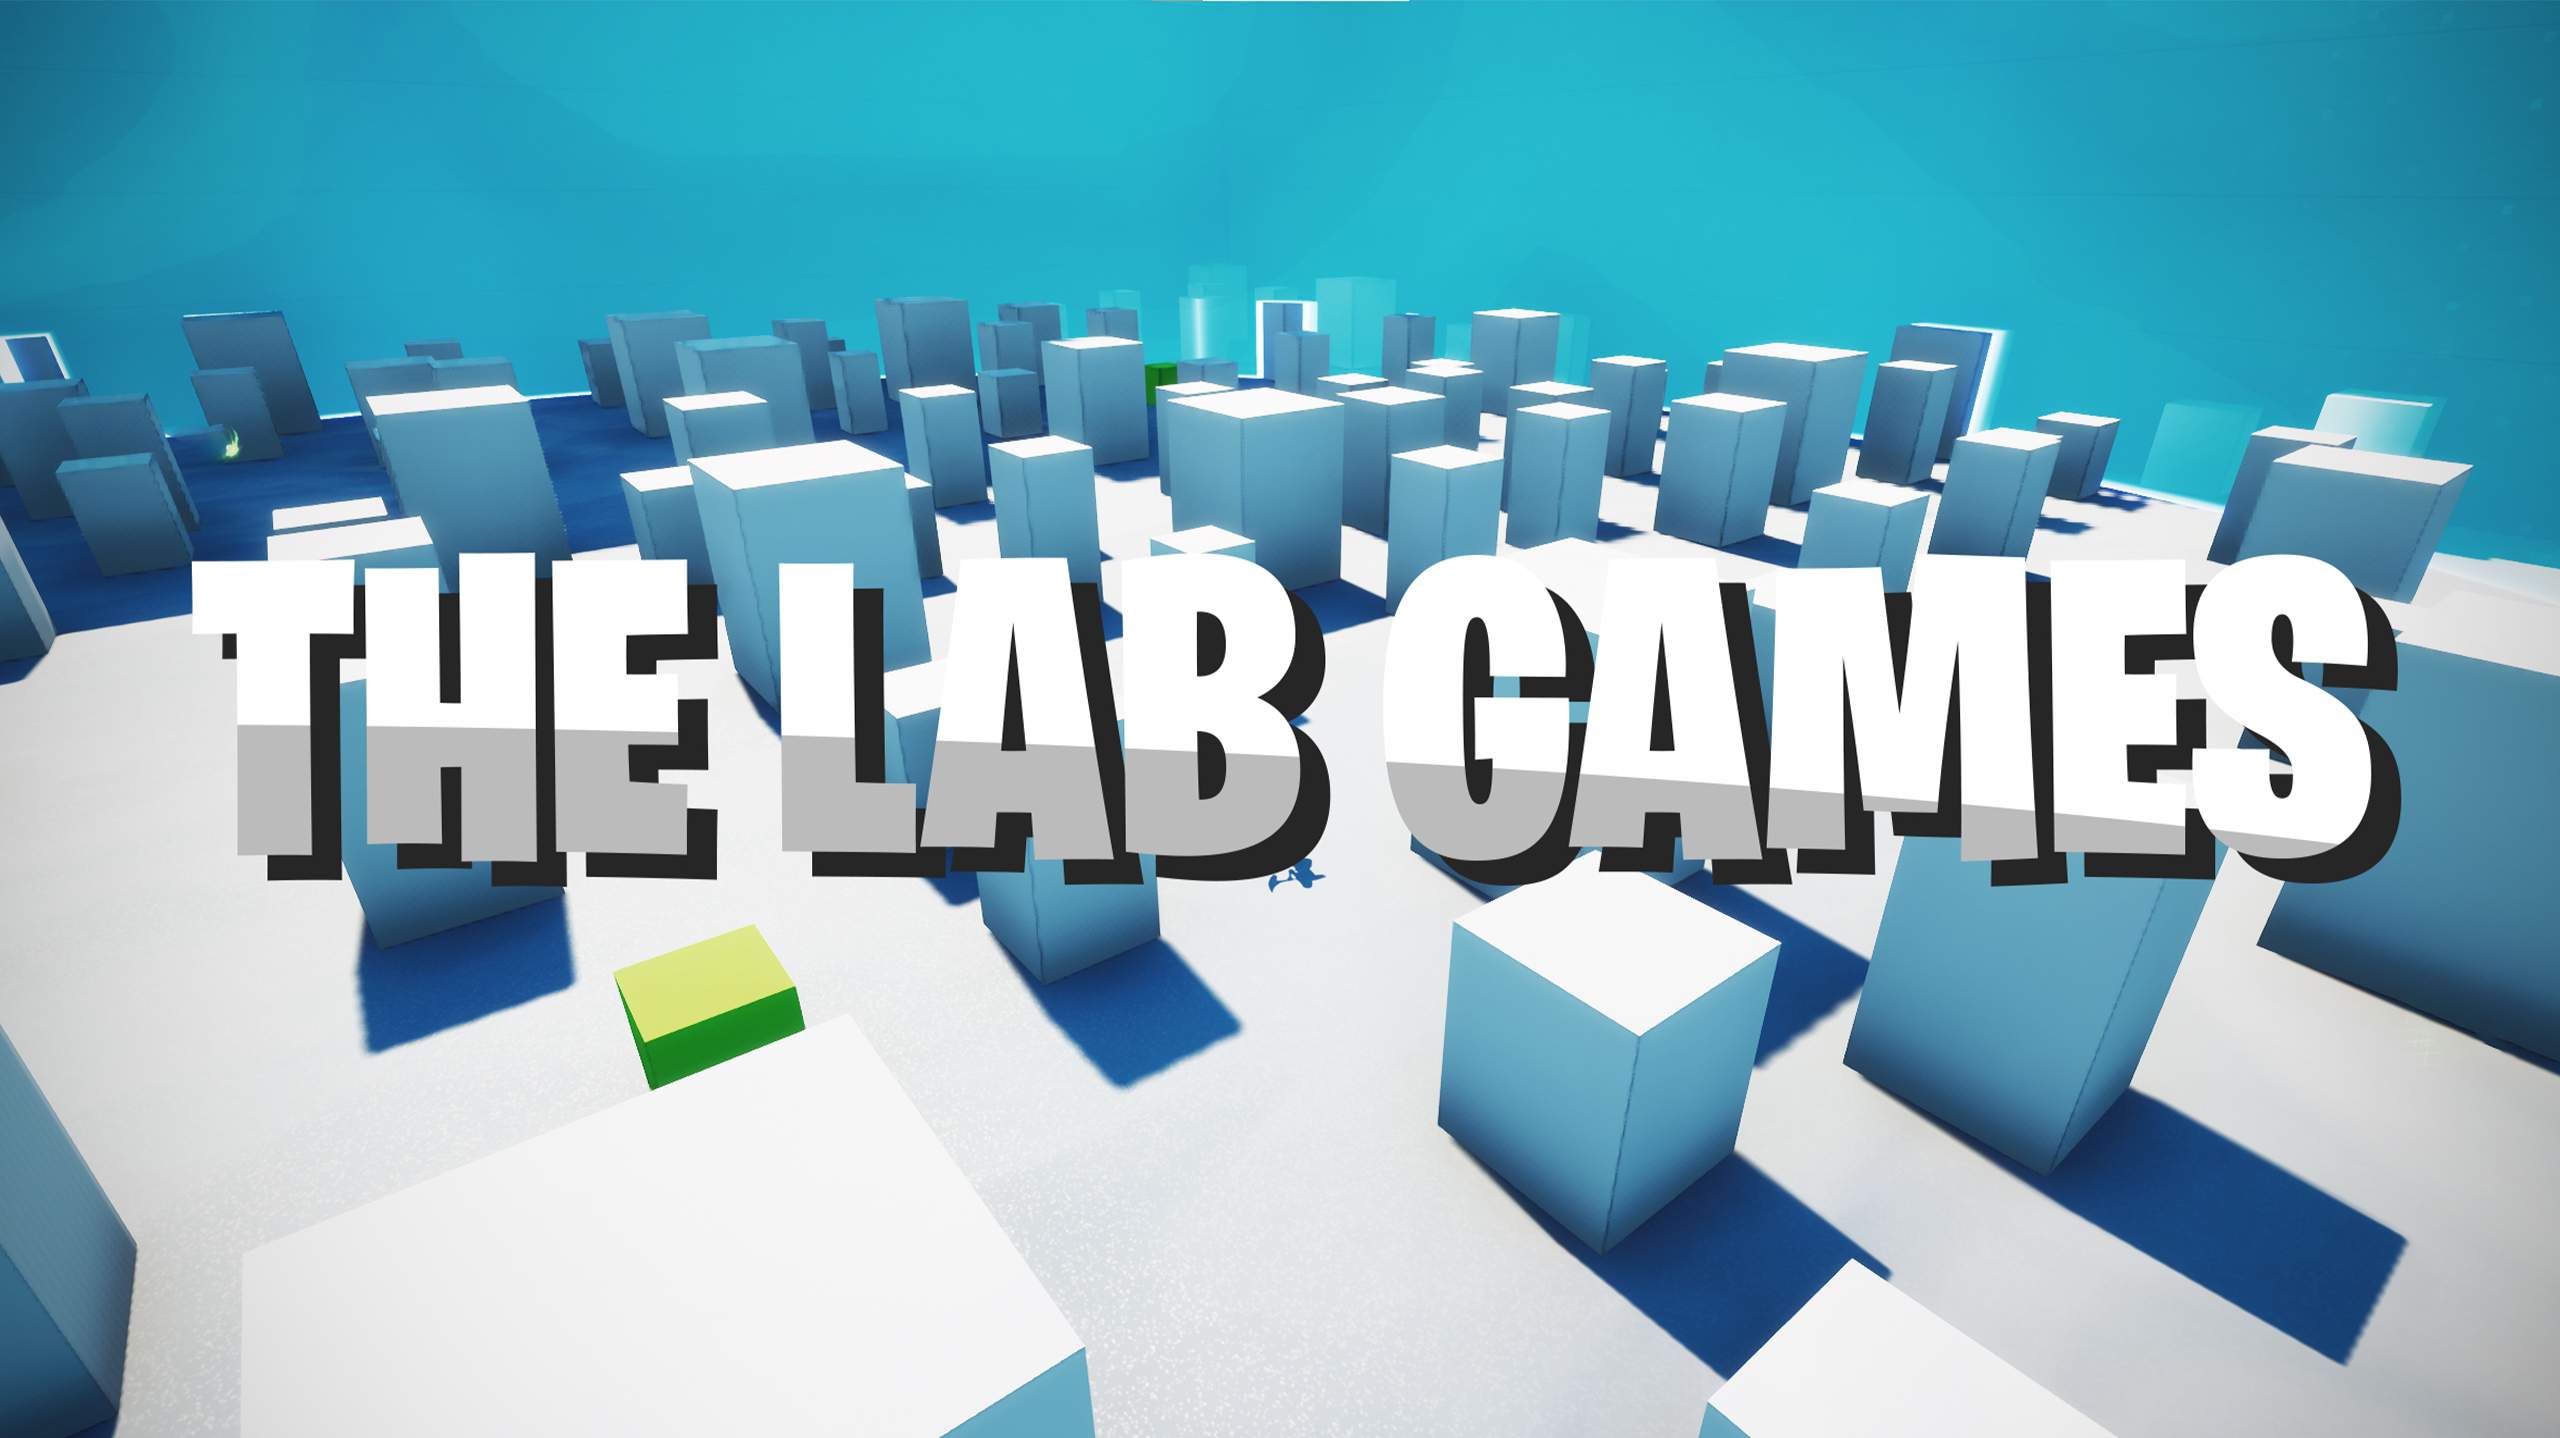 THE LAB GAMES